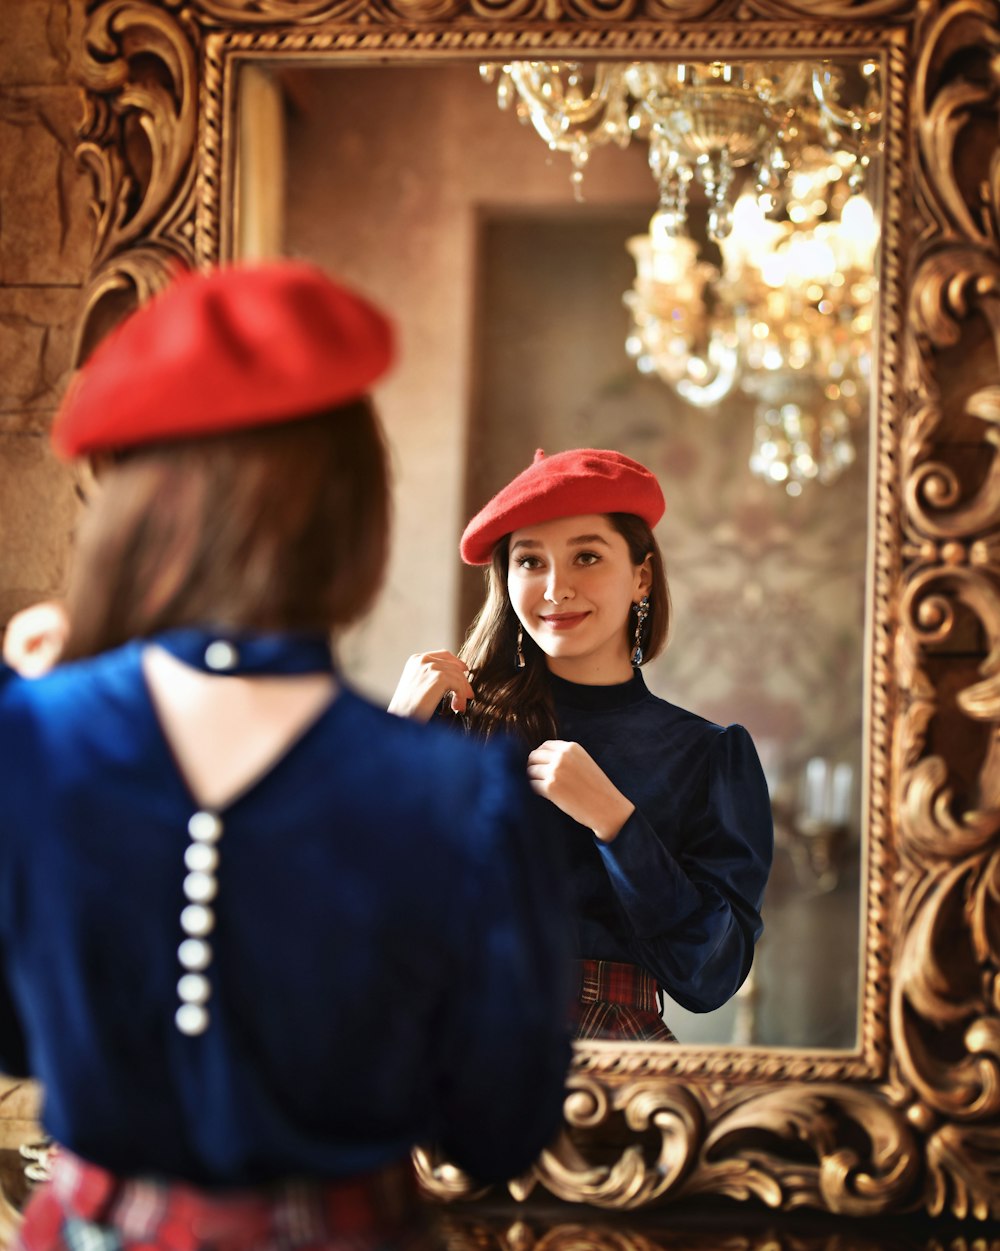 a woman in a red hat is looking at herself in the mirror